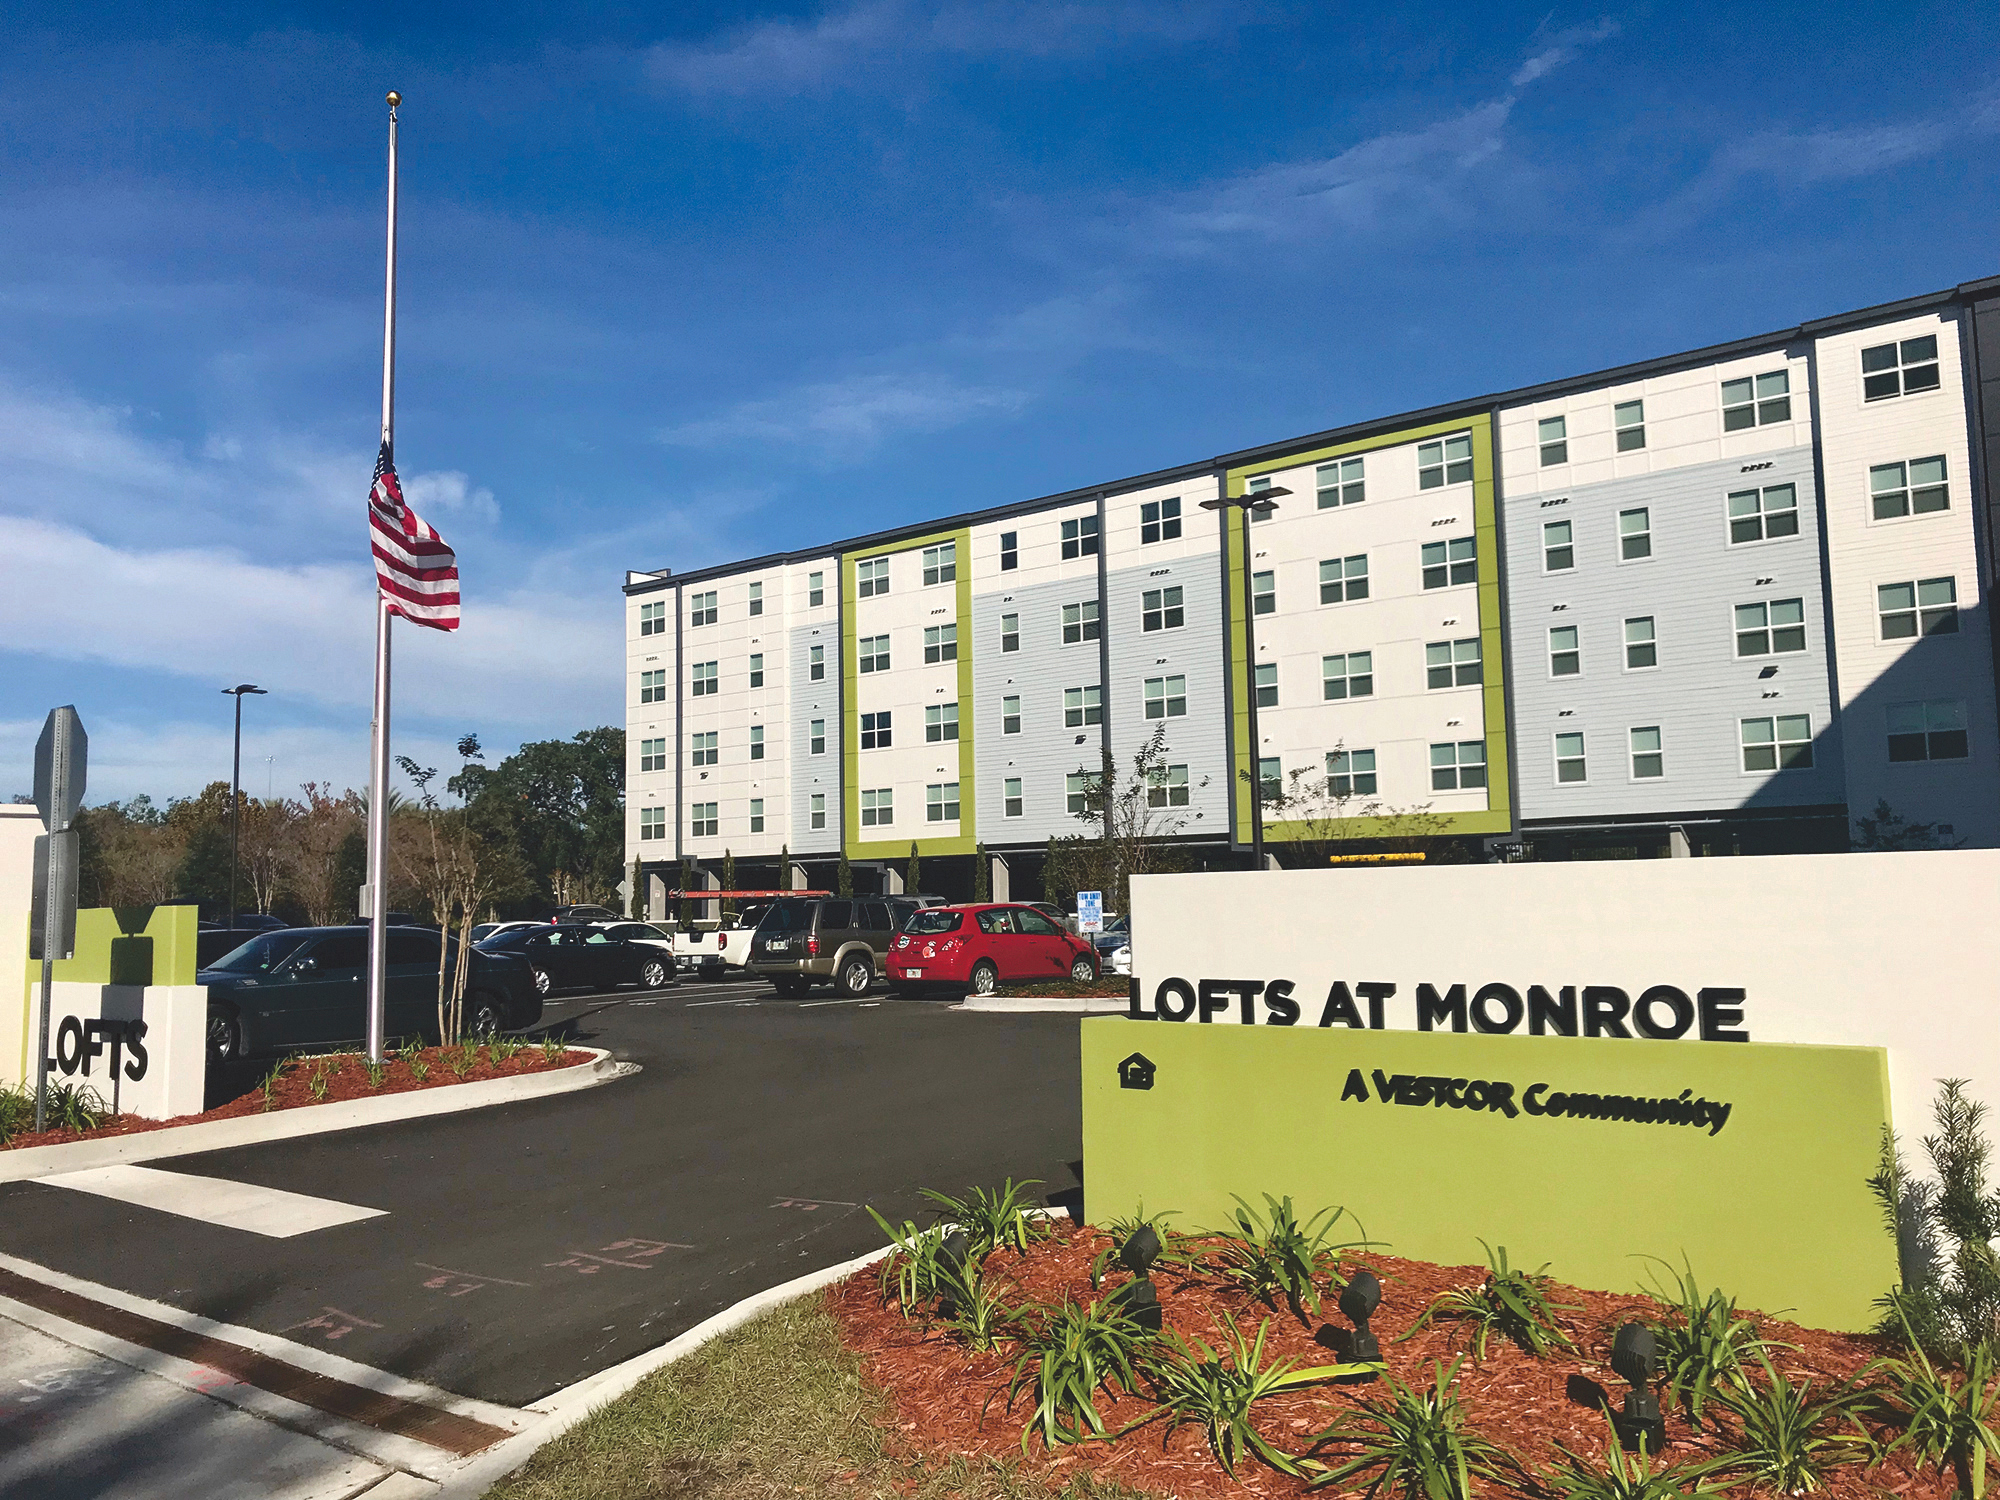 The Lofts at Monroe apartments opened in LaVilla in 2018 and are fully occupied with a waiting list.